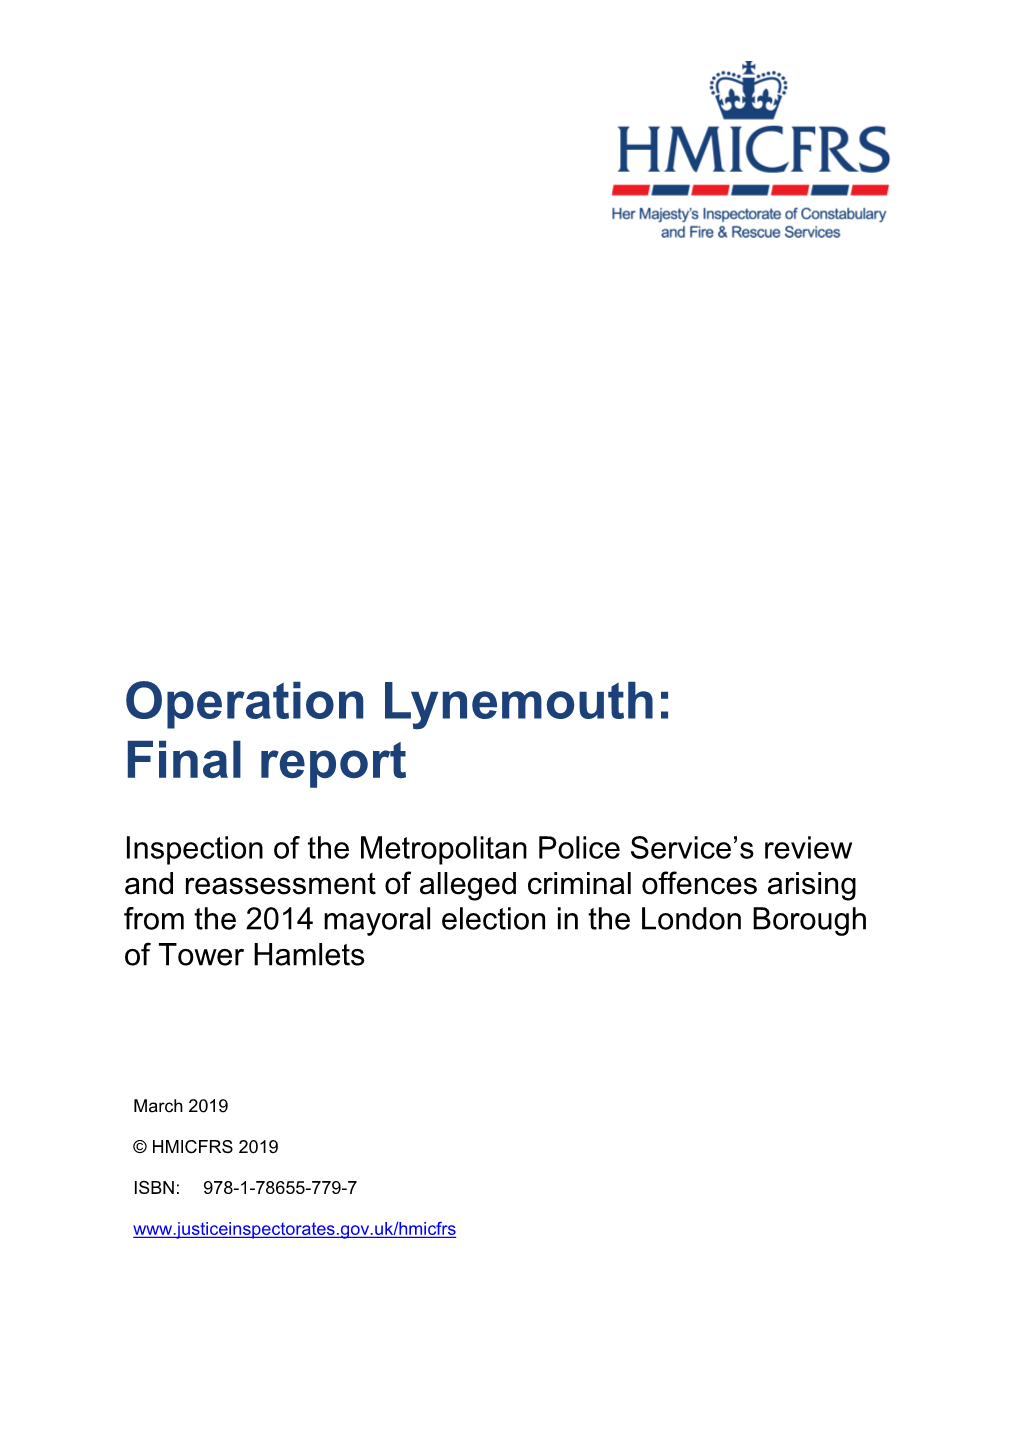 Operation Lynemouth: Final Report